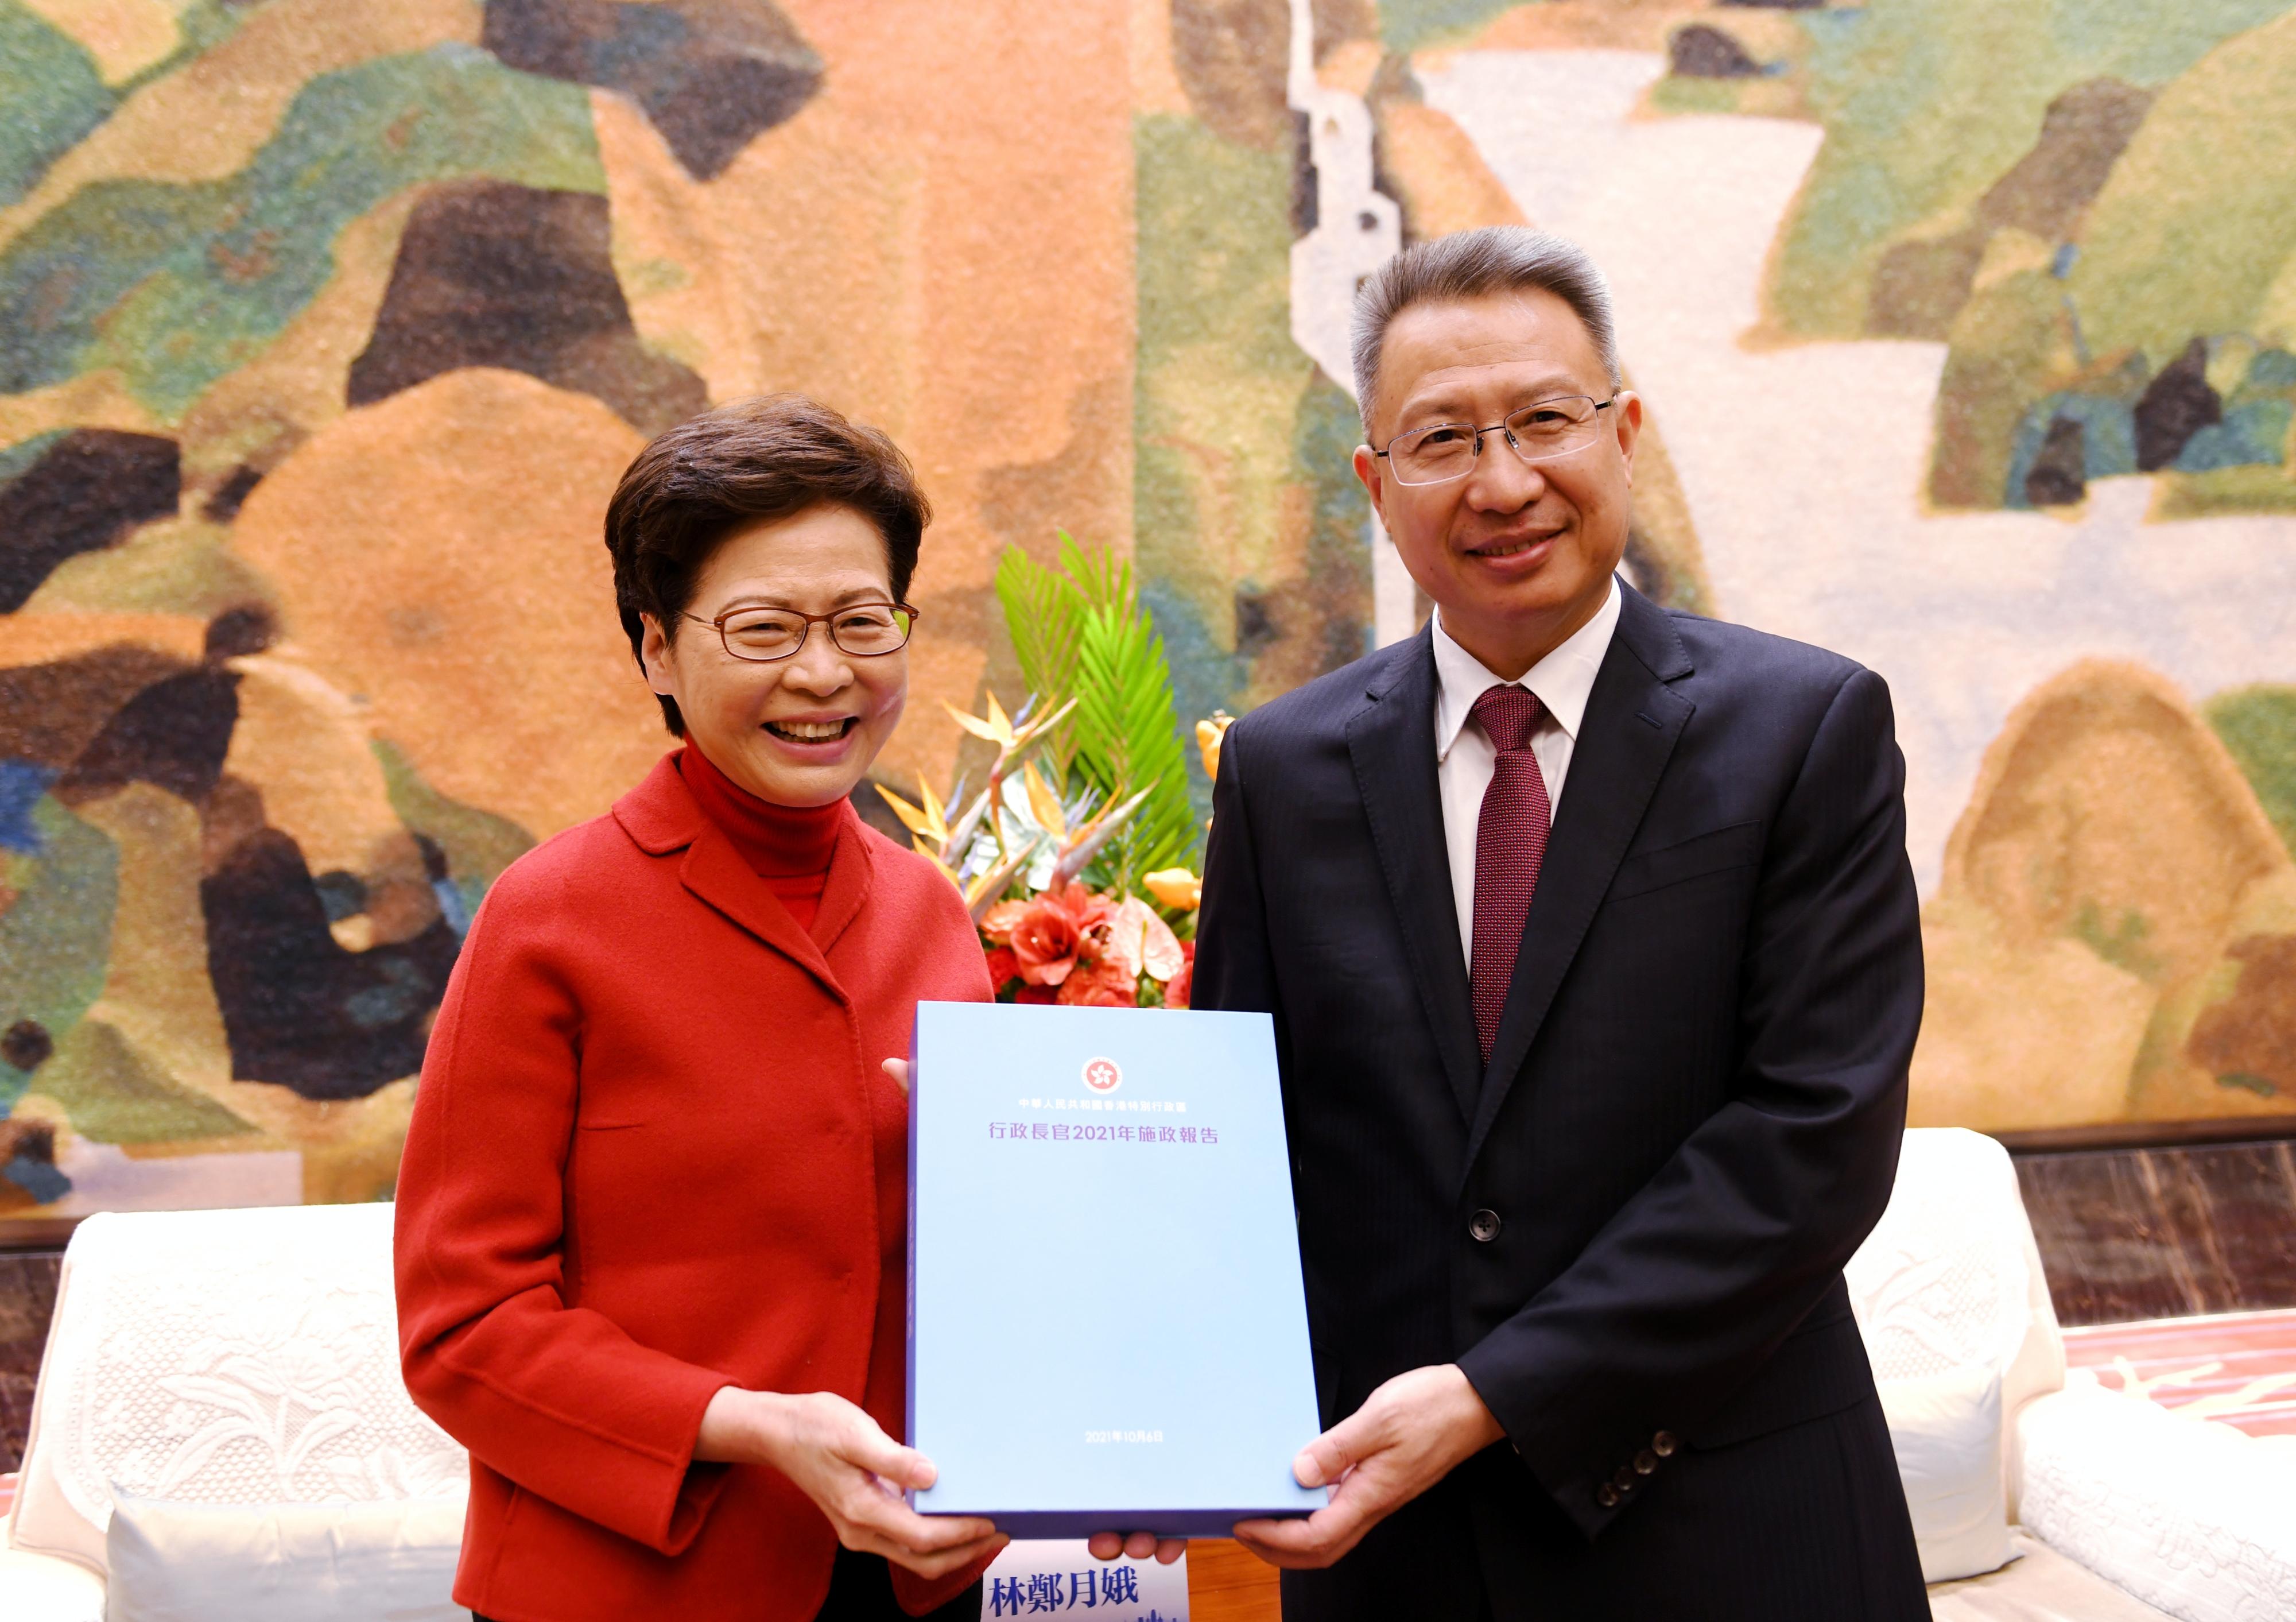 The Chief Executive, Mrs Carrie Lam, continued her visit to Wuhan in Hubei Province today (November 30). Photo shows Mrs Lam (left) presenting the 2021 Policy Address information kit to the Secretary of the CPC Wuhan Municipal Committee, Mr Guo Yuanqiang (right).
